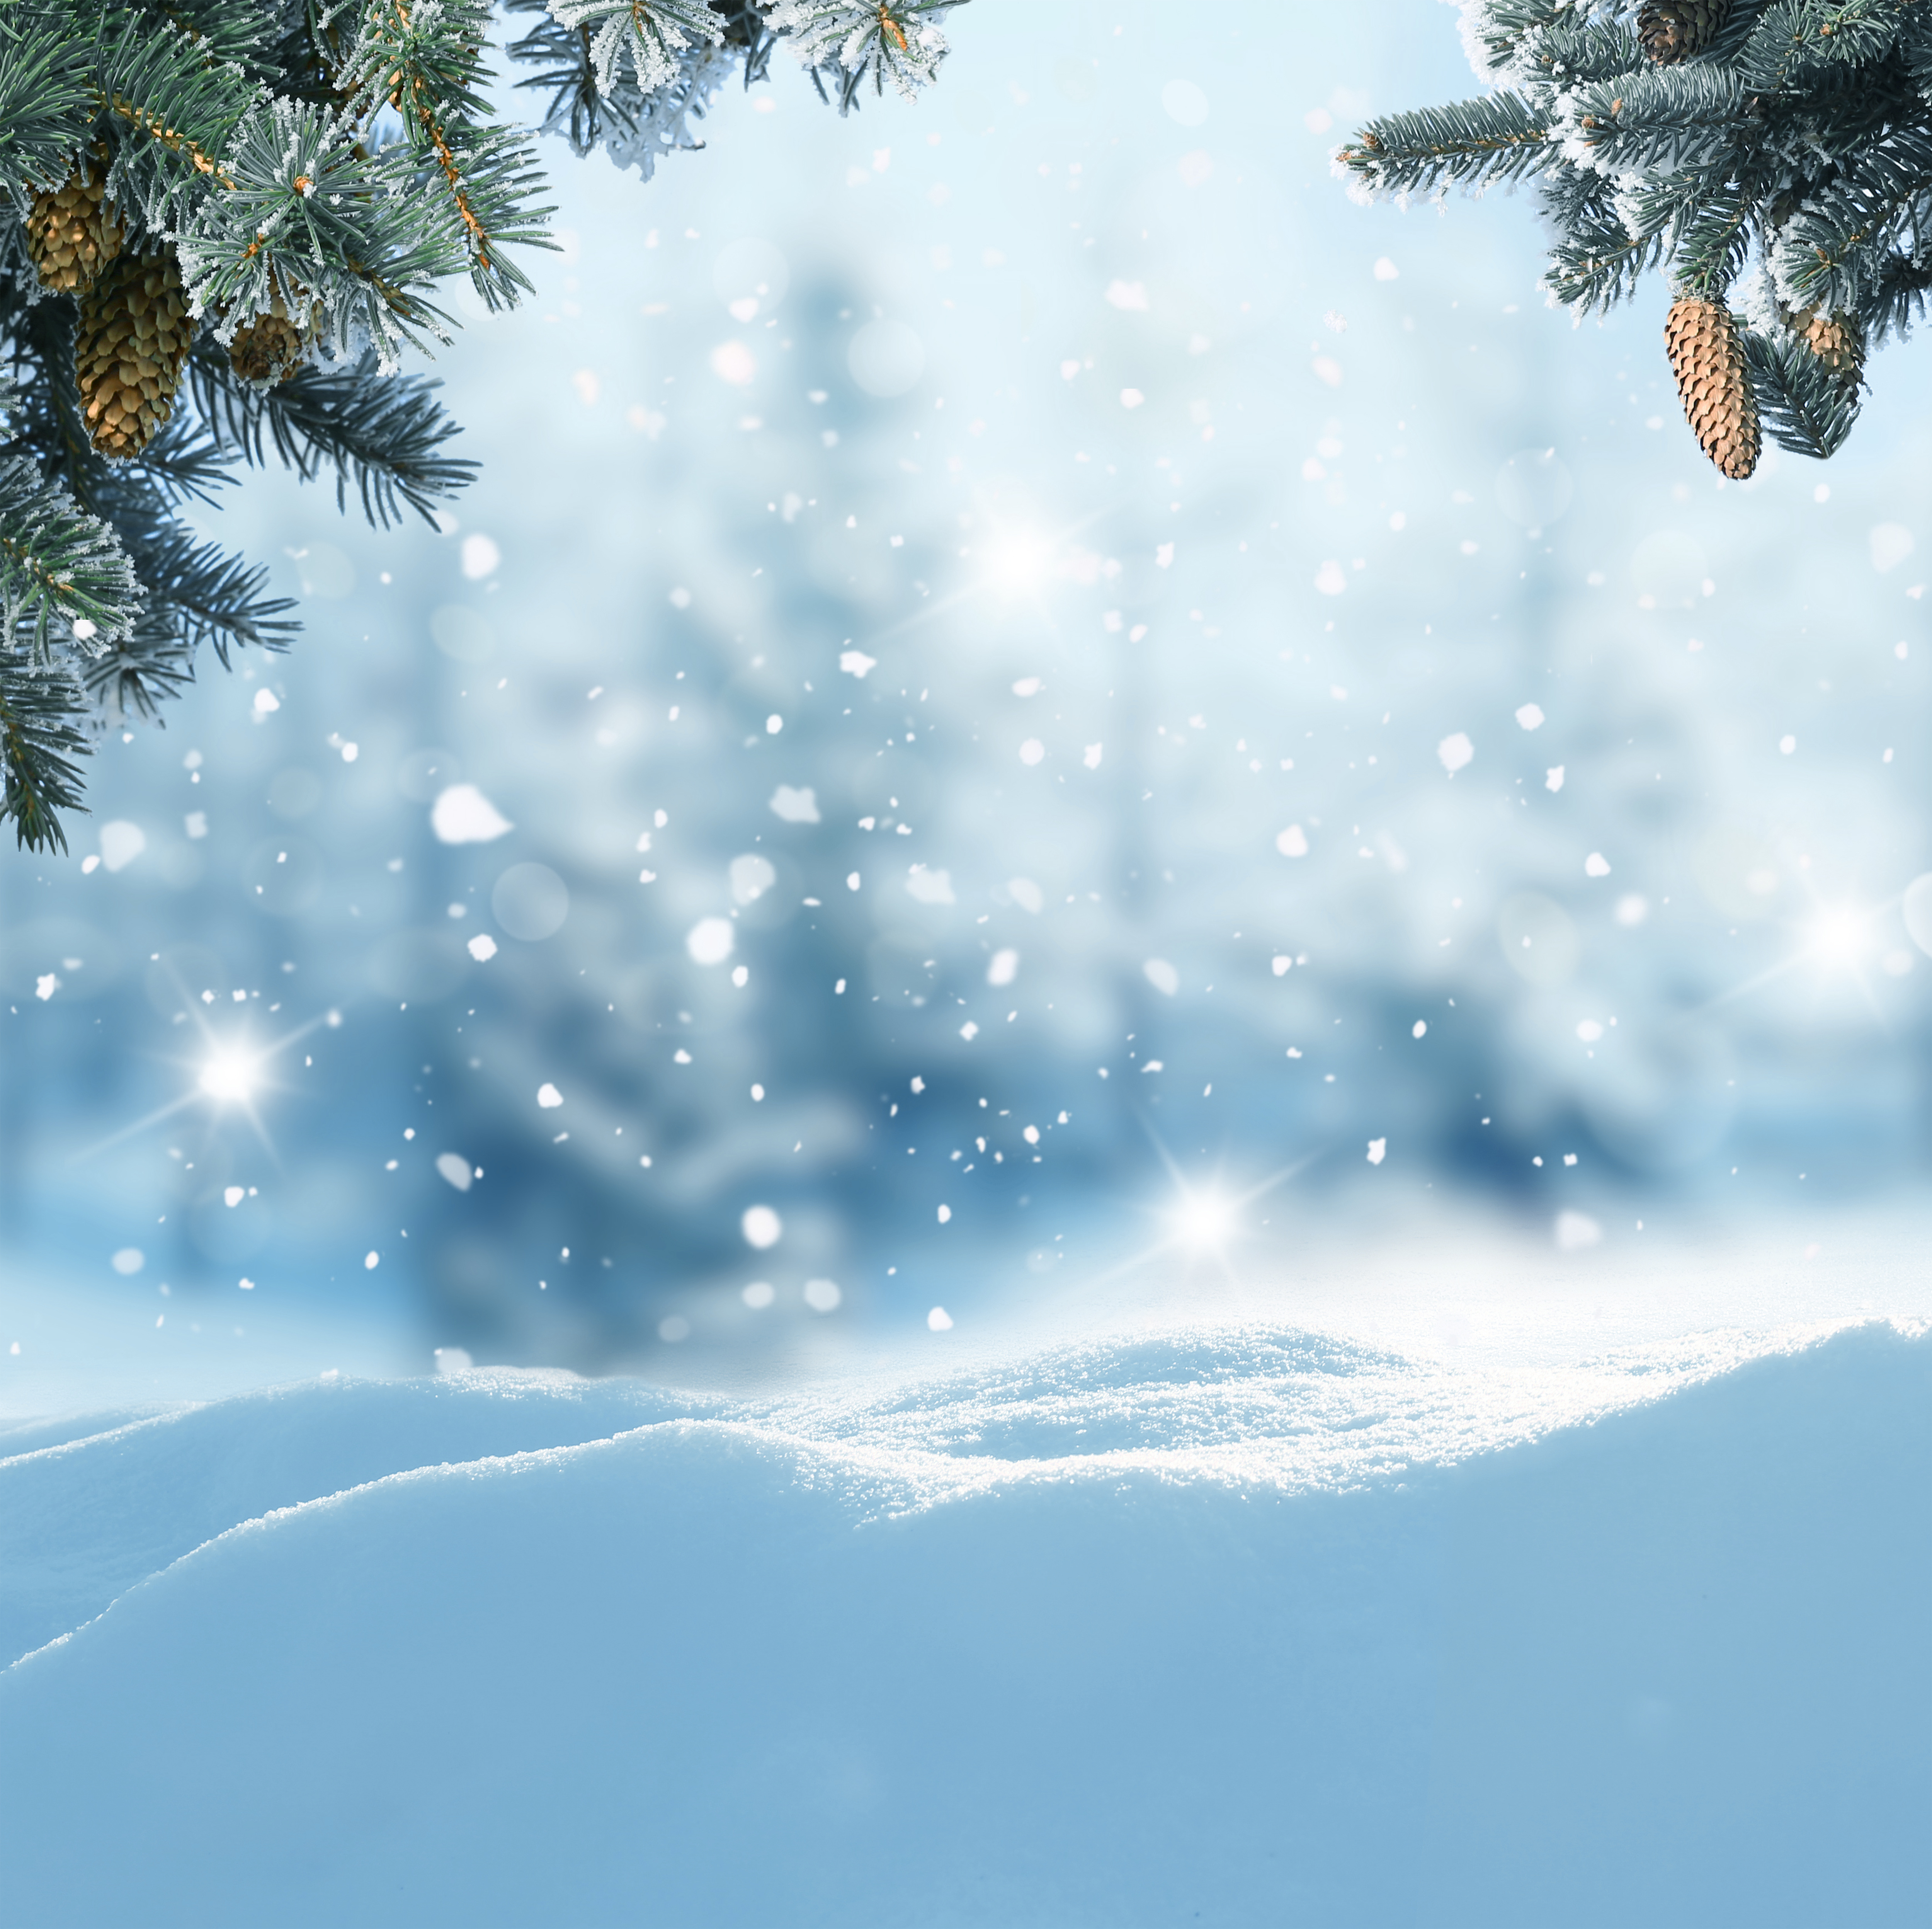 Winter_Snowy_Background_with_Pine_Branches